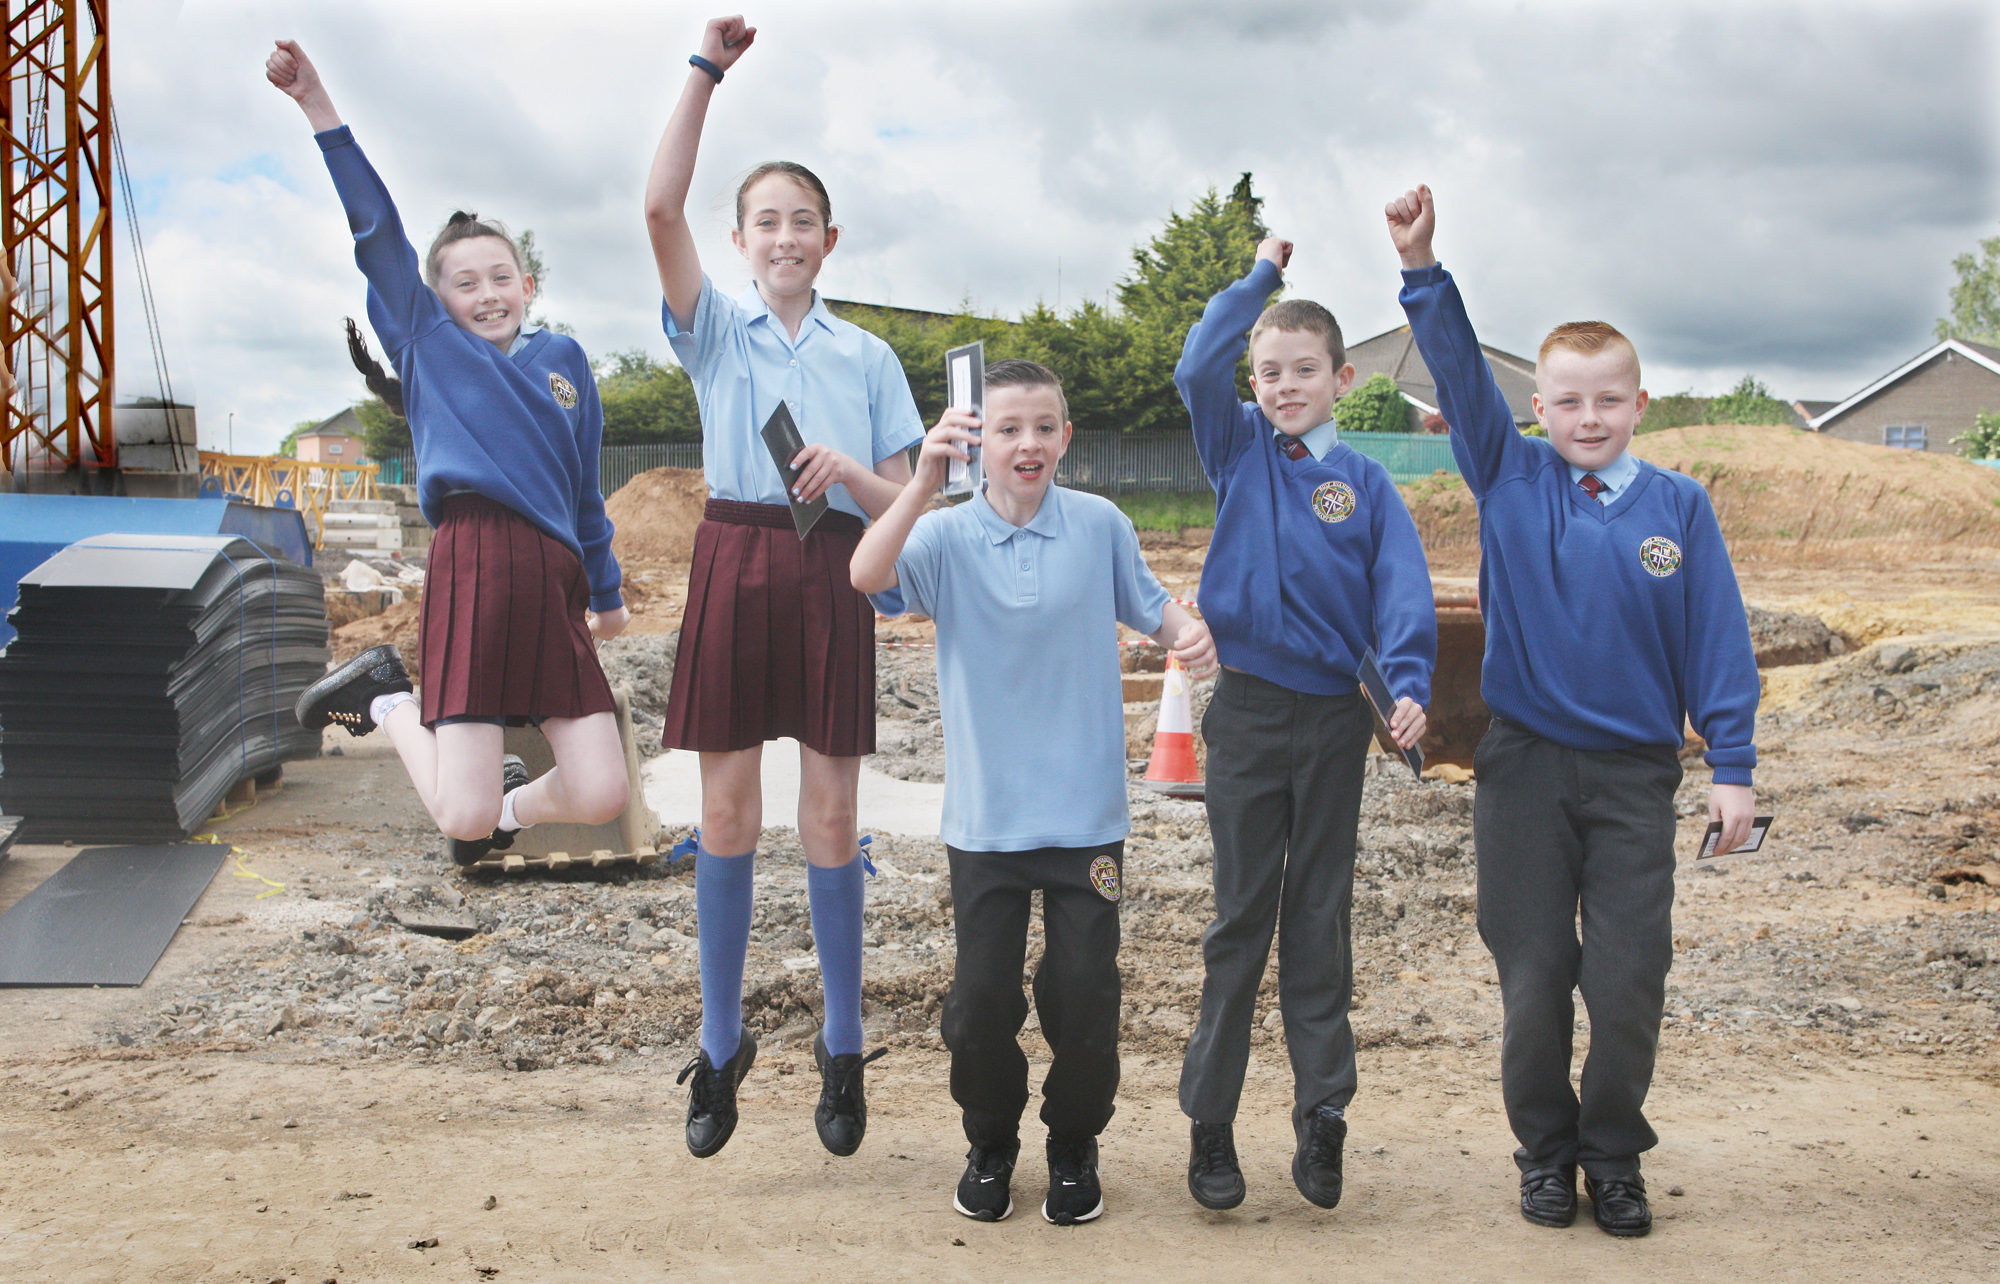 Holy Evangelists Primary School pupils Aoife, Holly Rose, Liam, Nathan and Aodhn jump with joy as Bishop Noel Treanor blesses the foundations of the new school building in Twinbrook